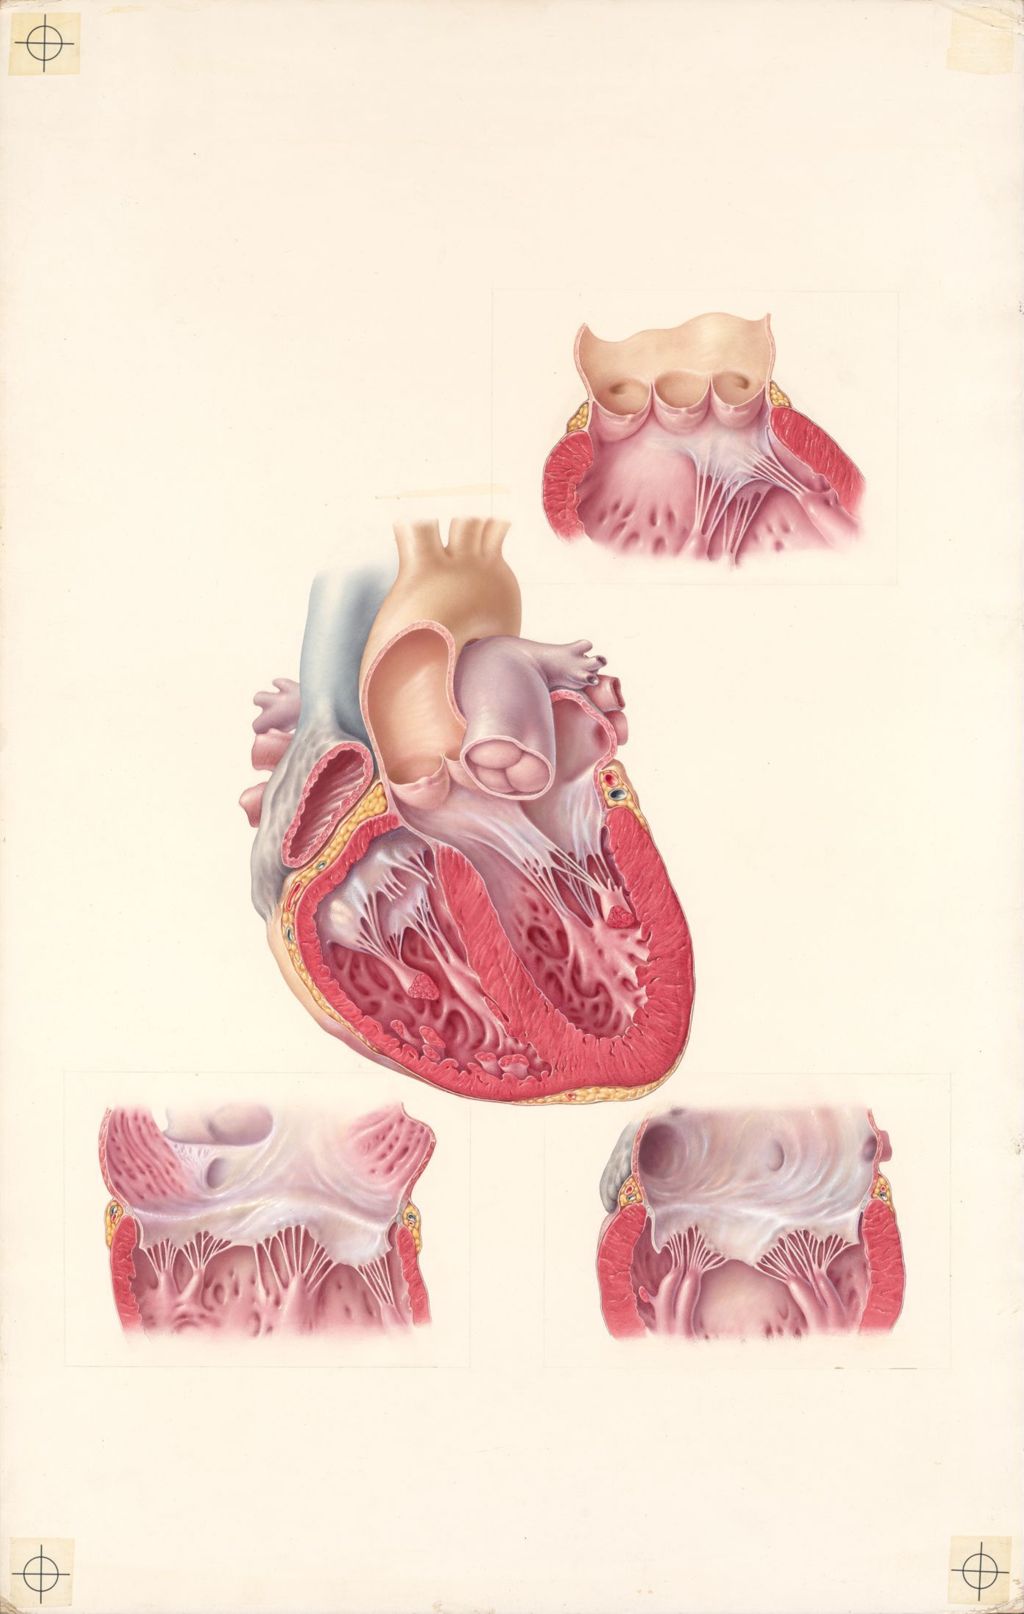 Miniature of Doctor-Patient explanatory atlas of anatomy, anatomy of the valves of the heart, Plate I, Dissections showing the ostia and the valves of the heart